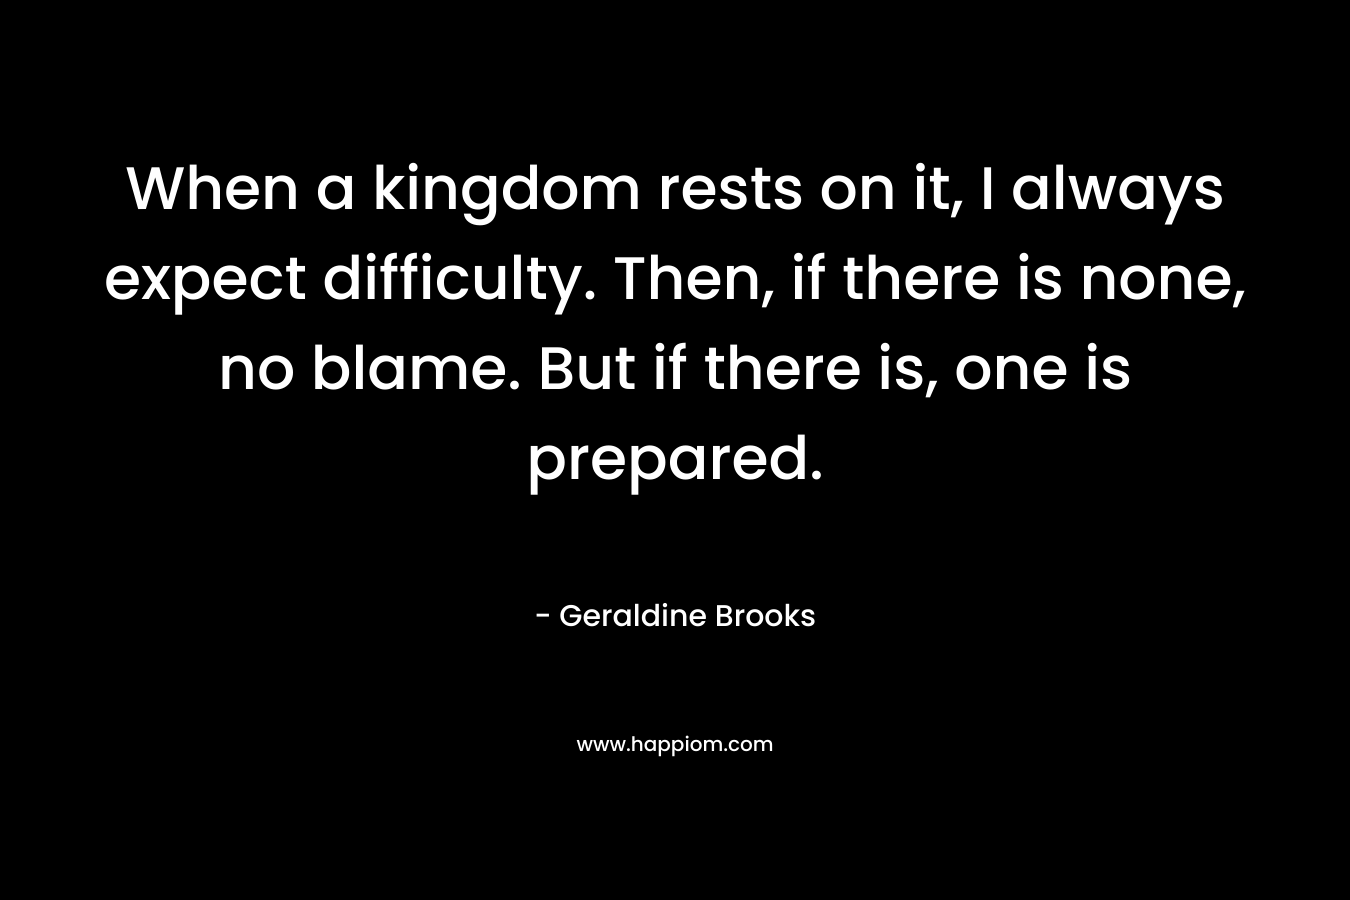 When a kingdom rests on it, I always expect difficulty. Then, if there is none, no blame. But if there is, one is prepared.